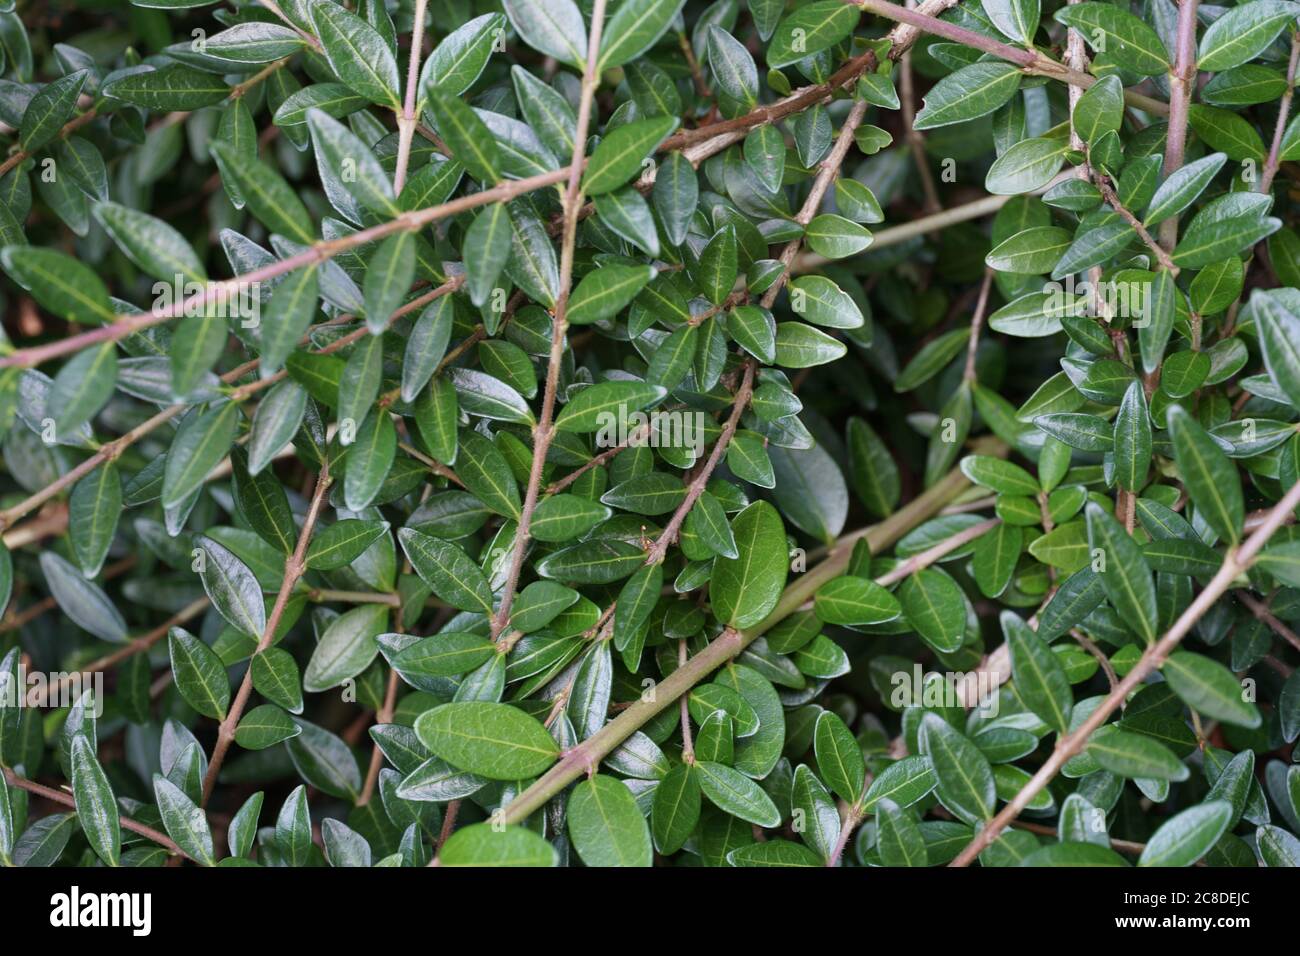 Box honeysuckle or Wilson's honeysuckle, in Latin called lonicera nitida. Close up view of some branches and leaves without flowers and fruits. Stock Photo